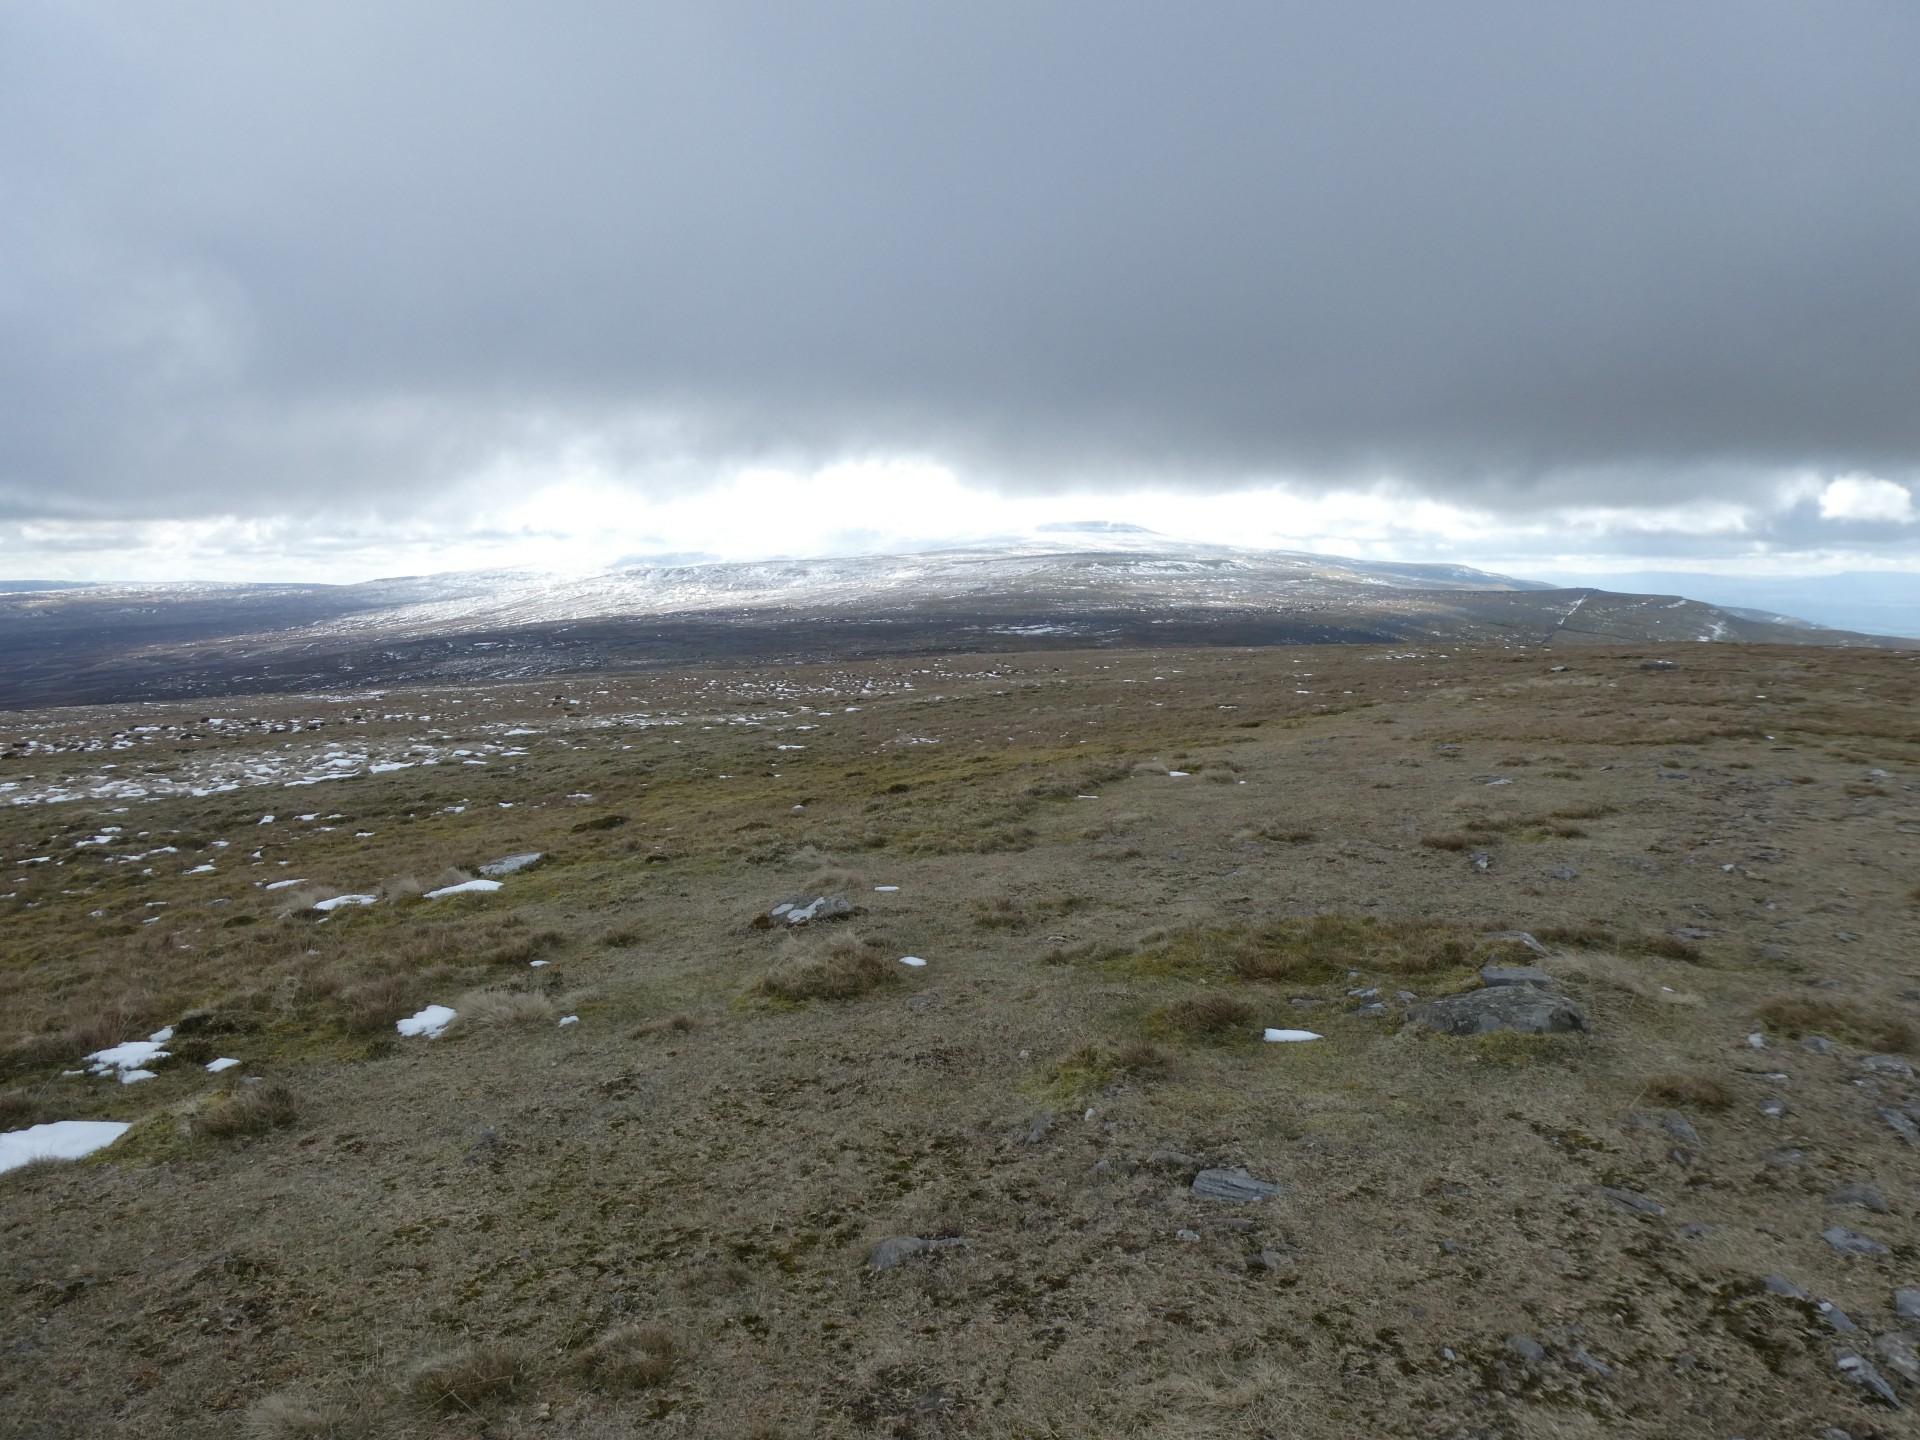 Very chilly over on Cross Fell